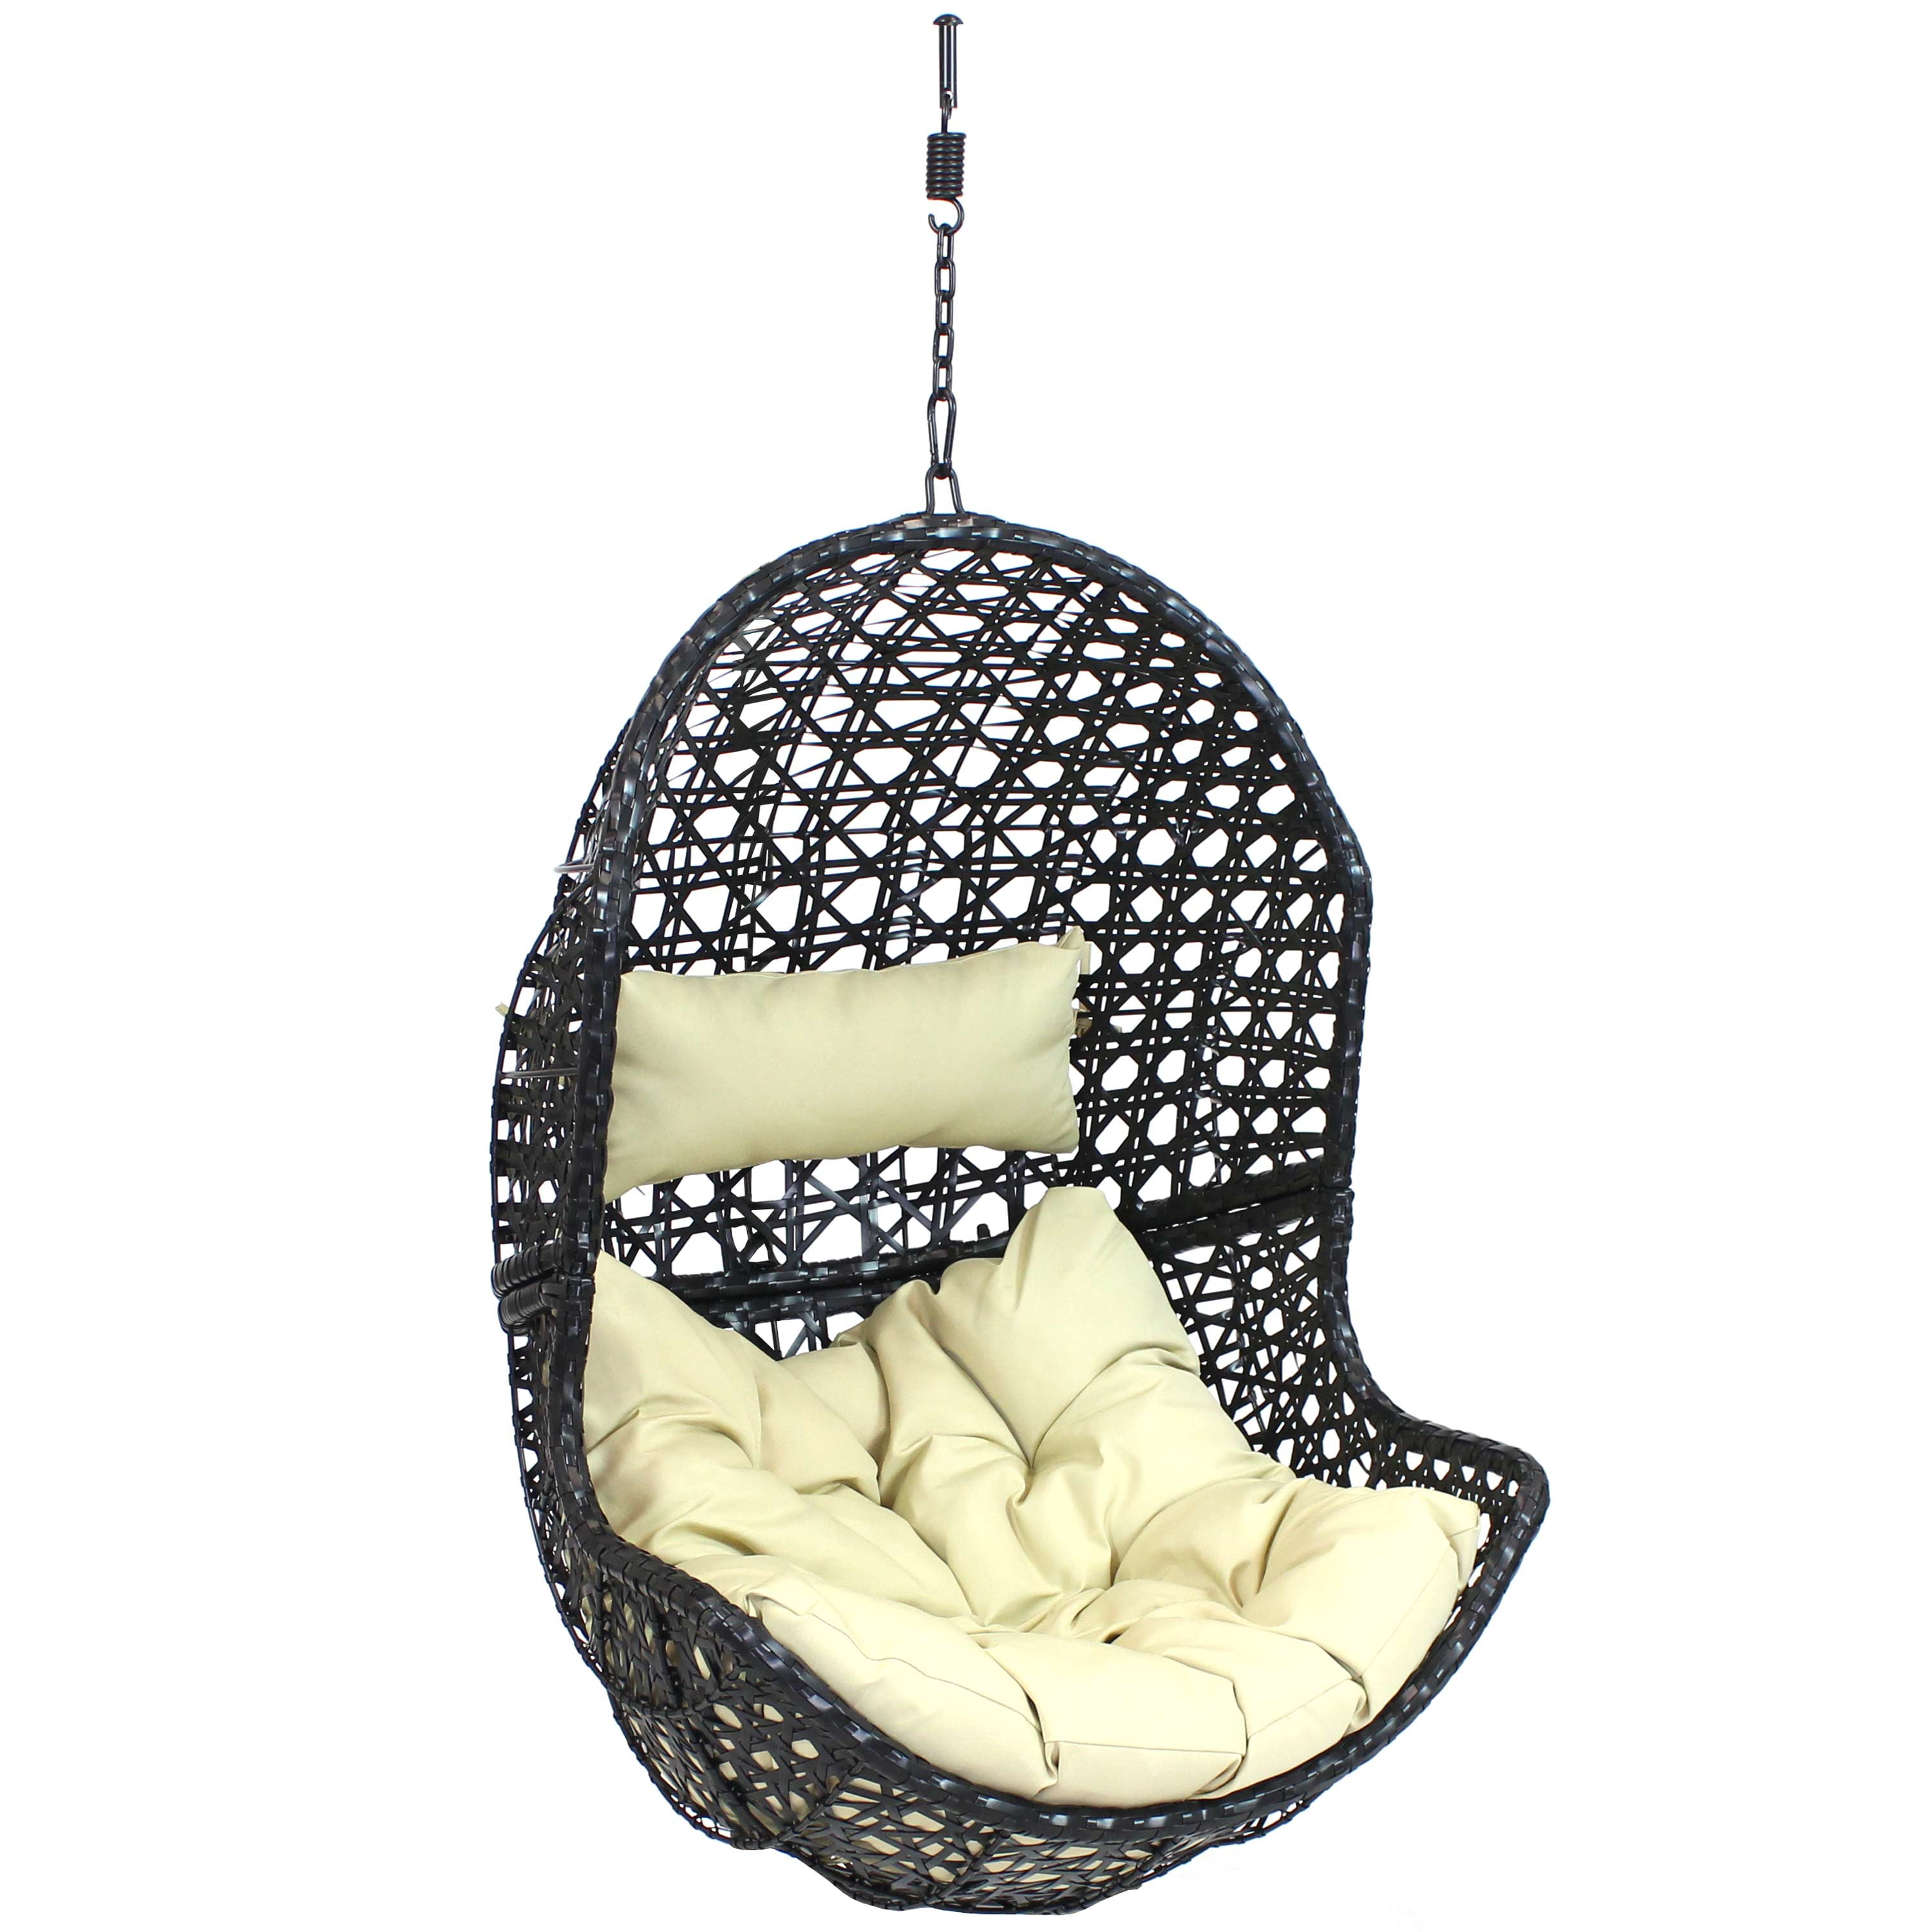 Sunnydaze Lauren Hanging Egg Chair - Outdoor Patio Lounge Seat - Boho Style Furniture - Resin Wicker Basket Design - Includes Beige Cushion - Furniture for Porch, Deck, Balcony and Garden